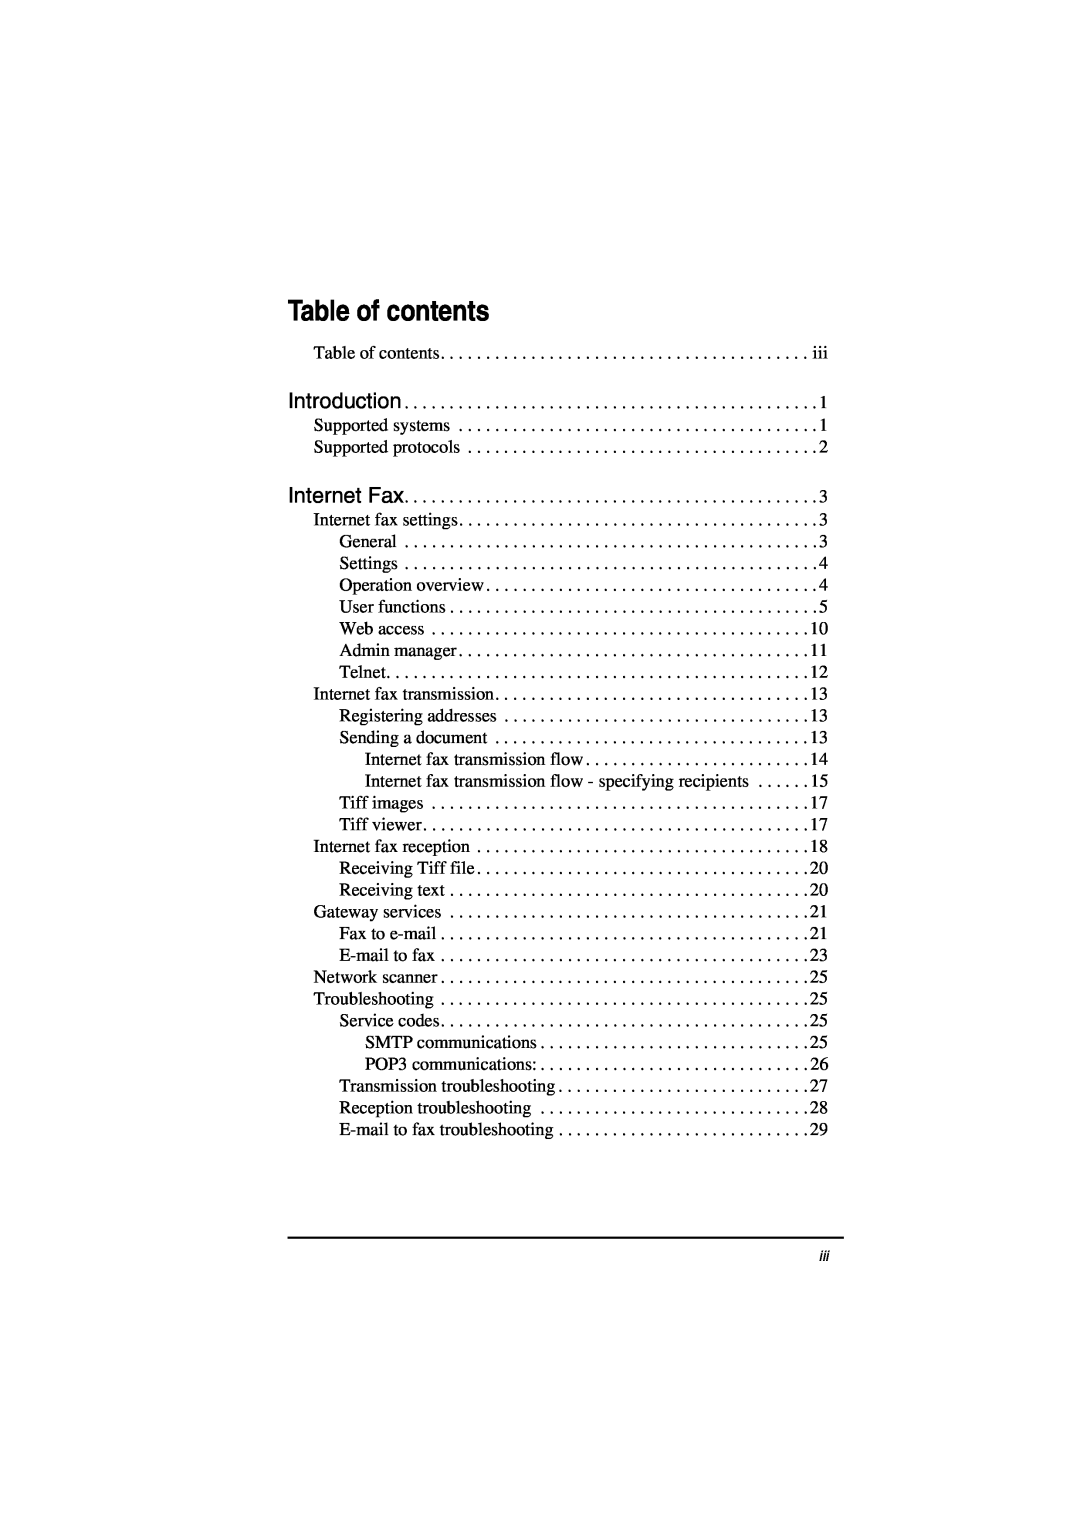 Oki ii manual Table of contents 